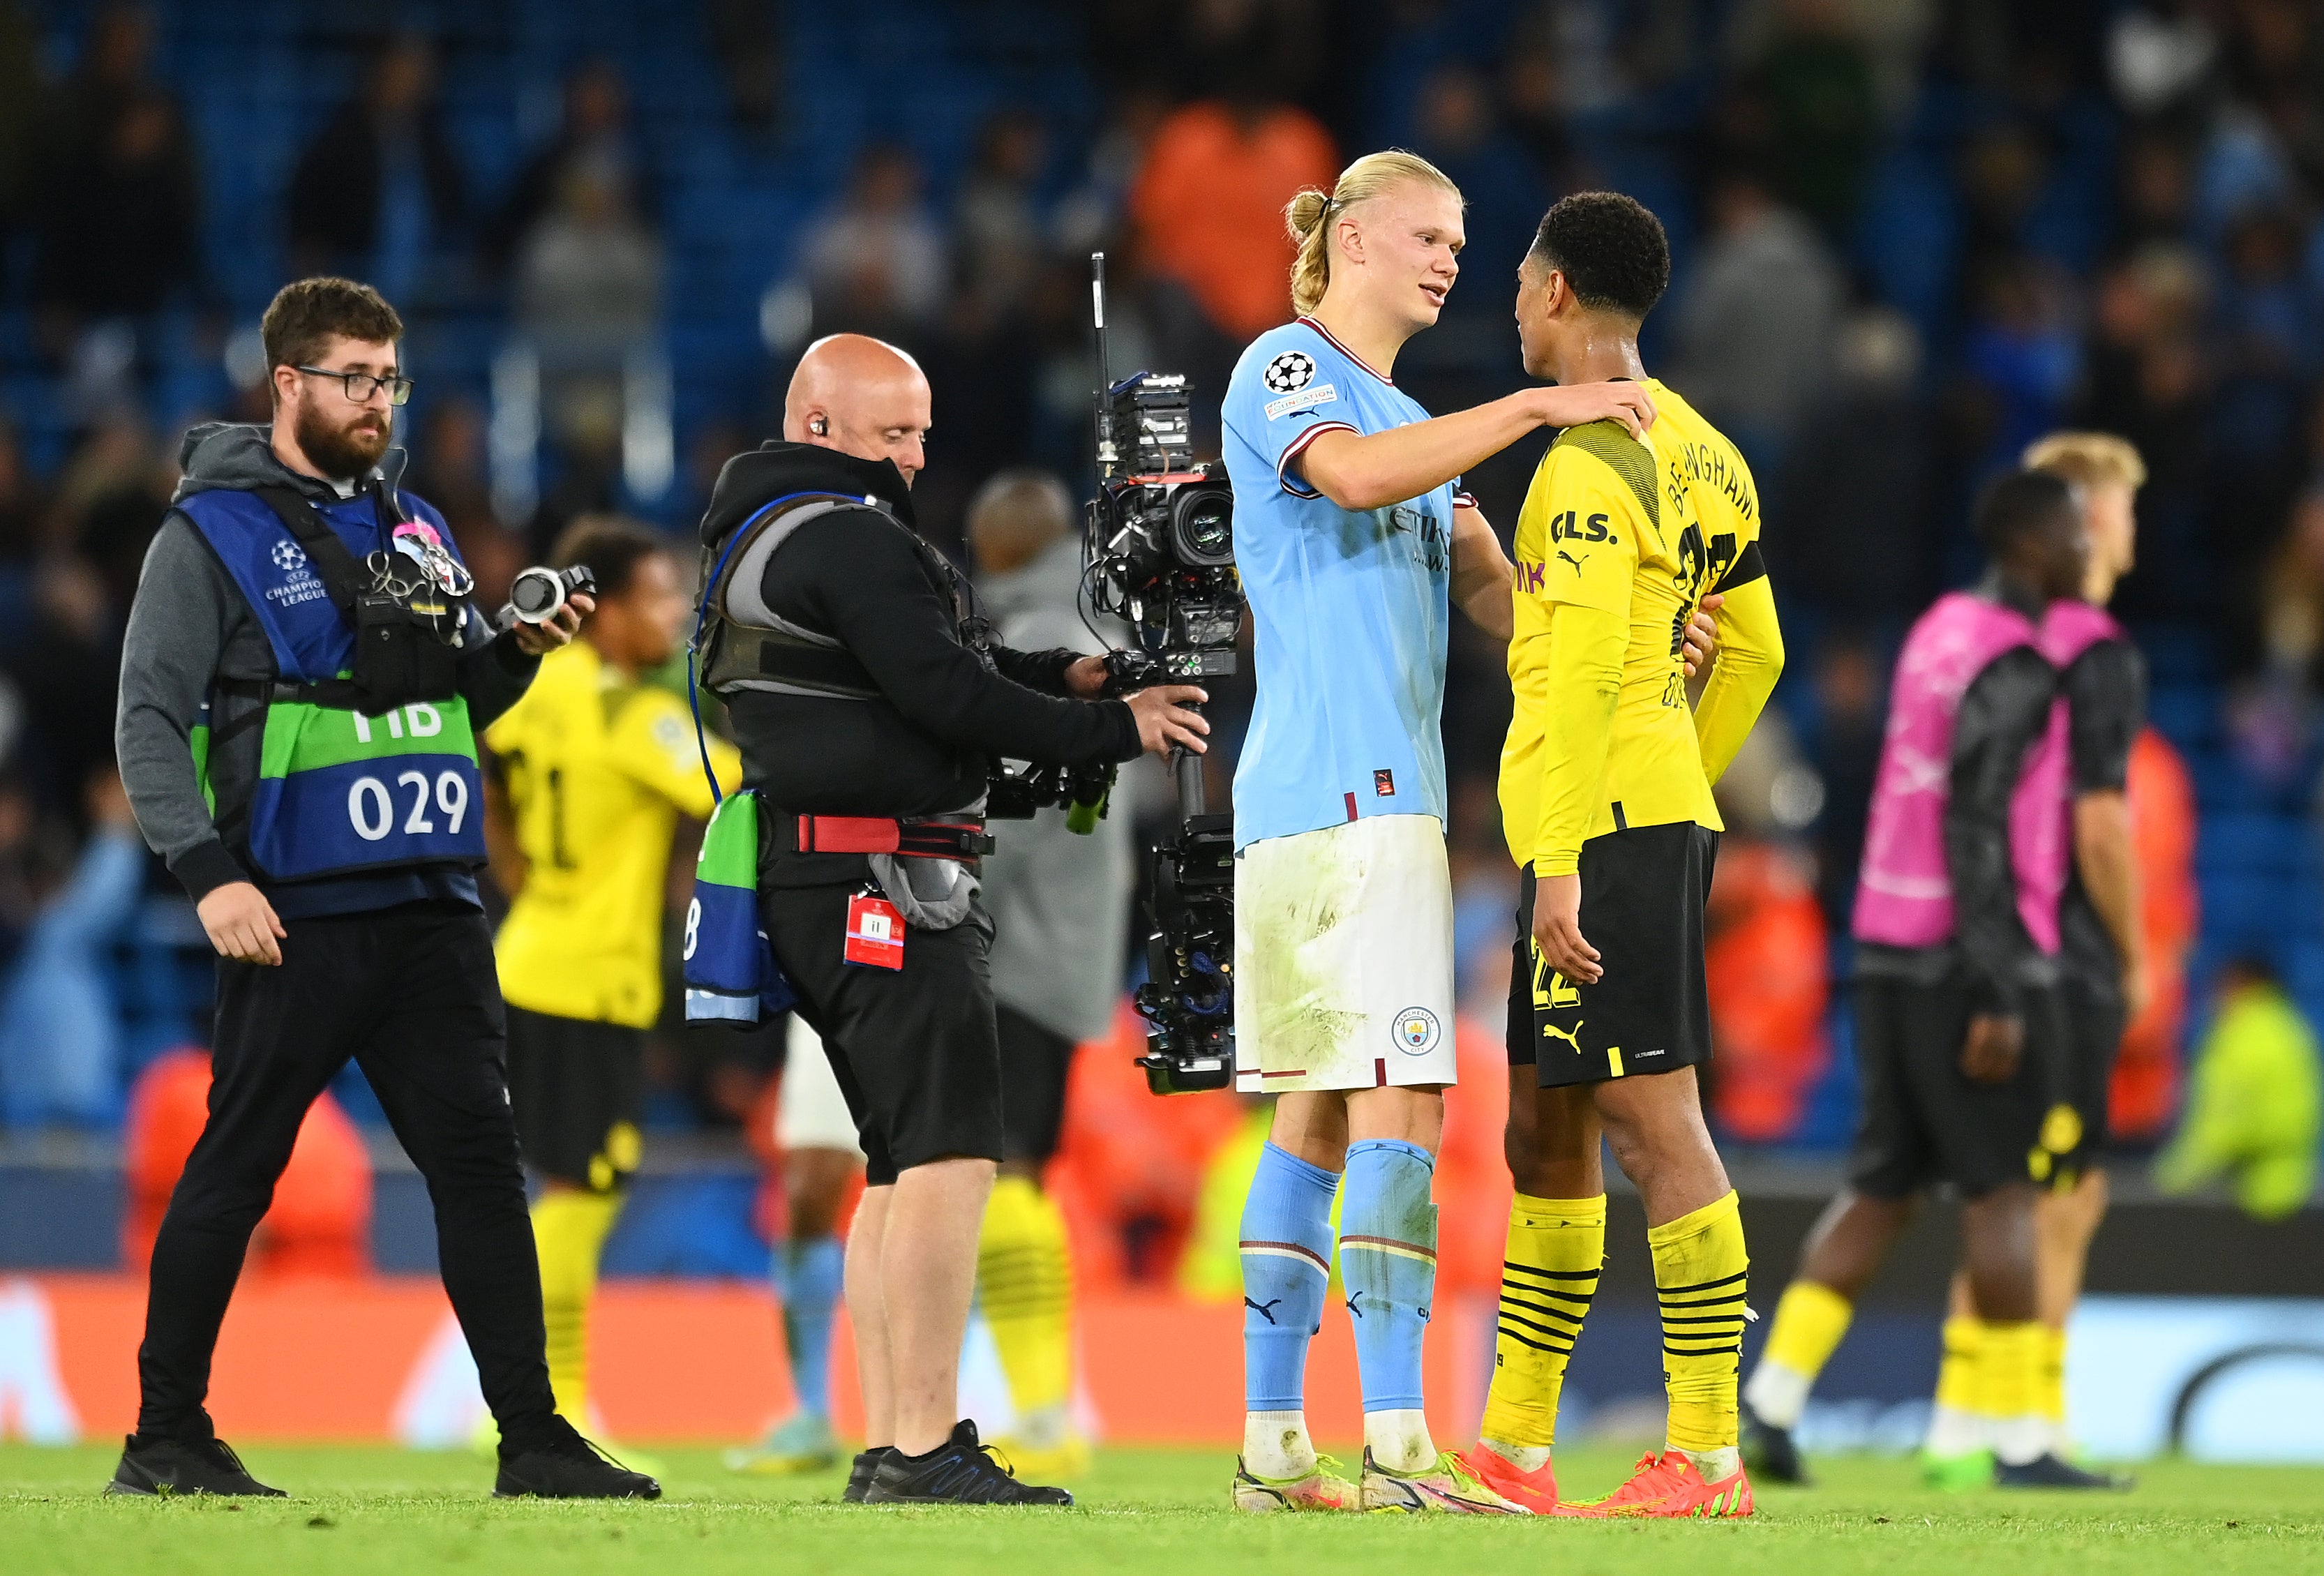 The Manchester City striker interacts with Jude Bellingham of Borussia Dortmund at the end of the game